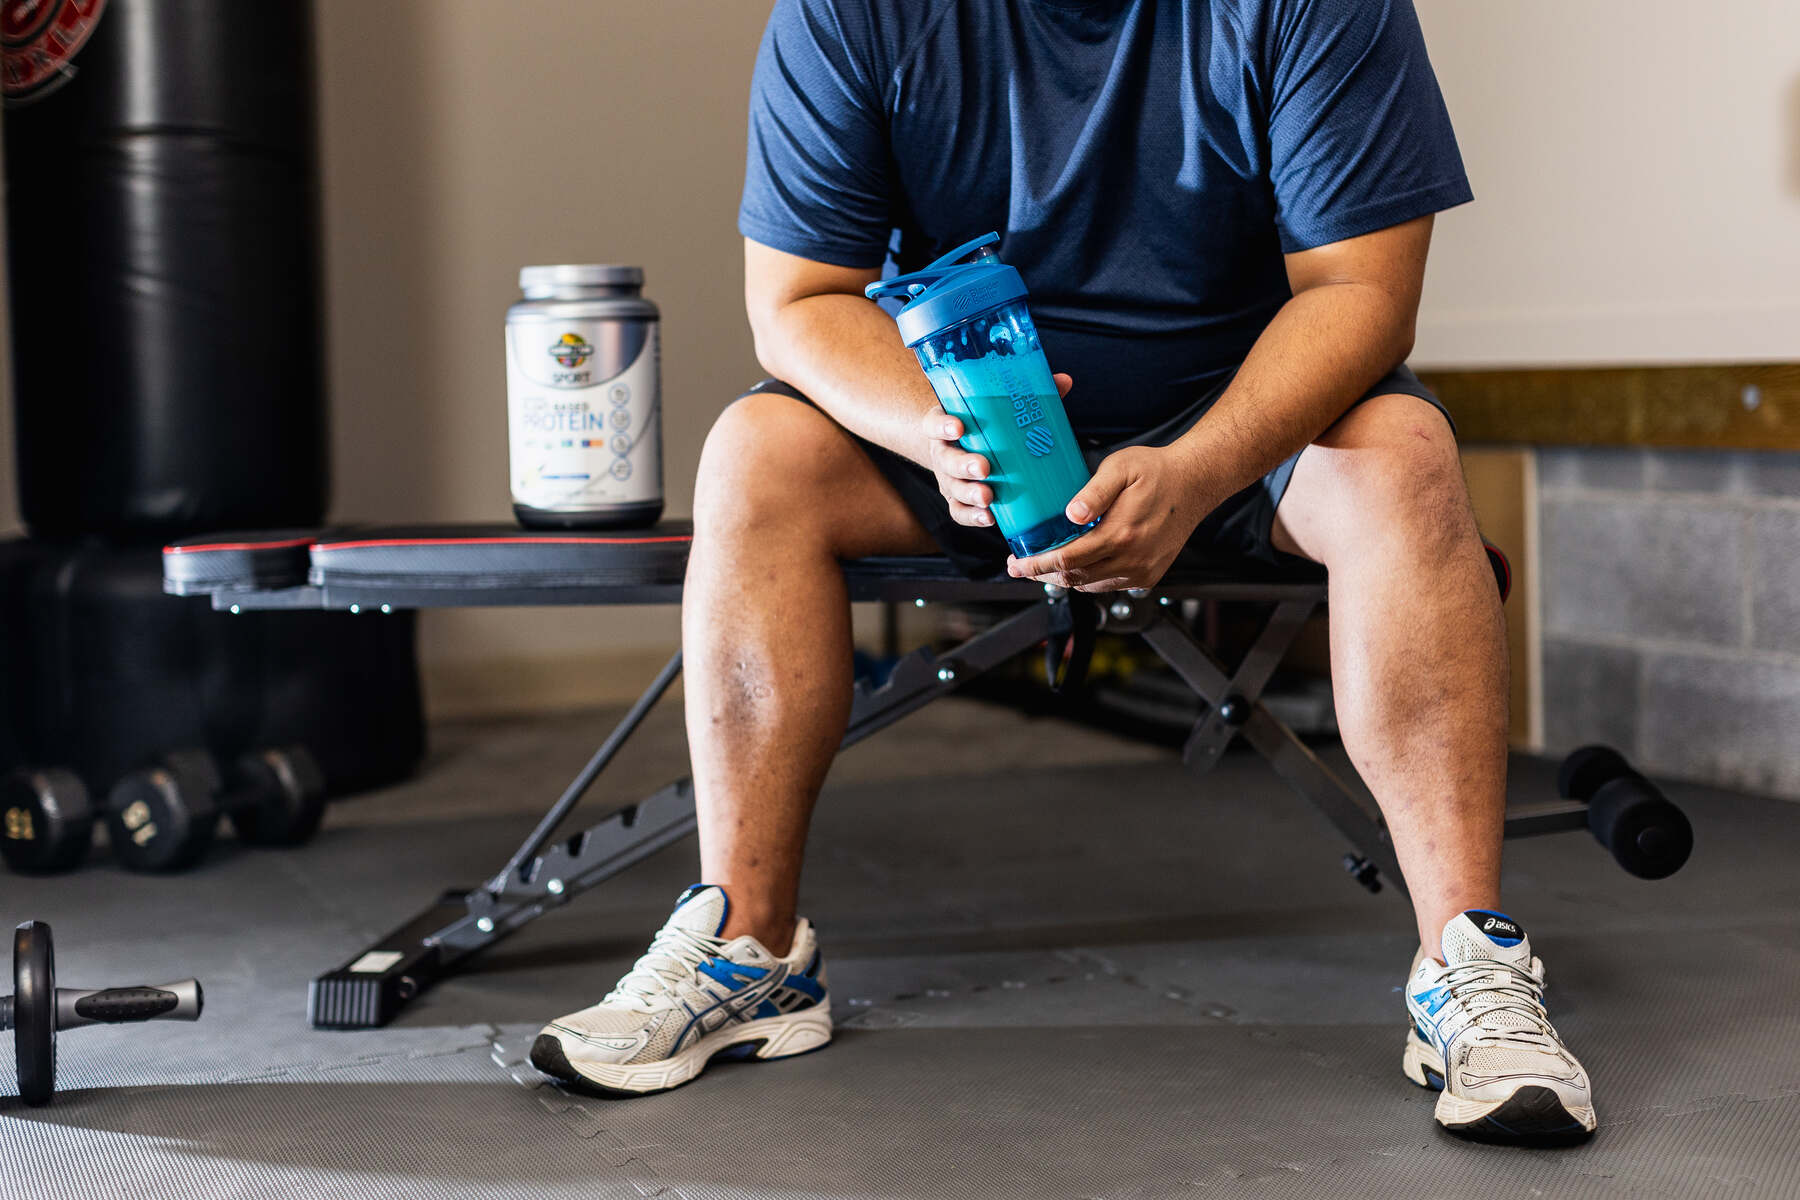 A person in a blue shirt seated in a gym holding a blue protein shaker with a silver container of Garden of Life Sport Organic Plant-Based Protein and workout equipment in the background